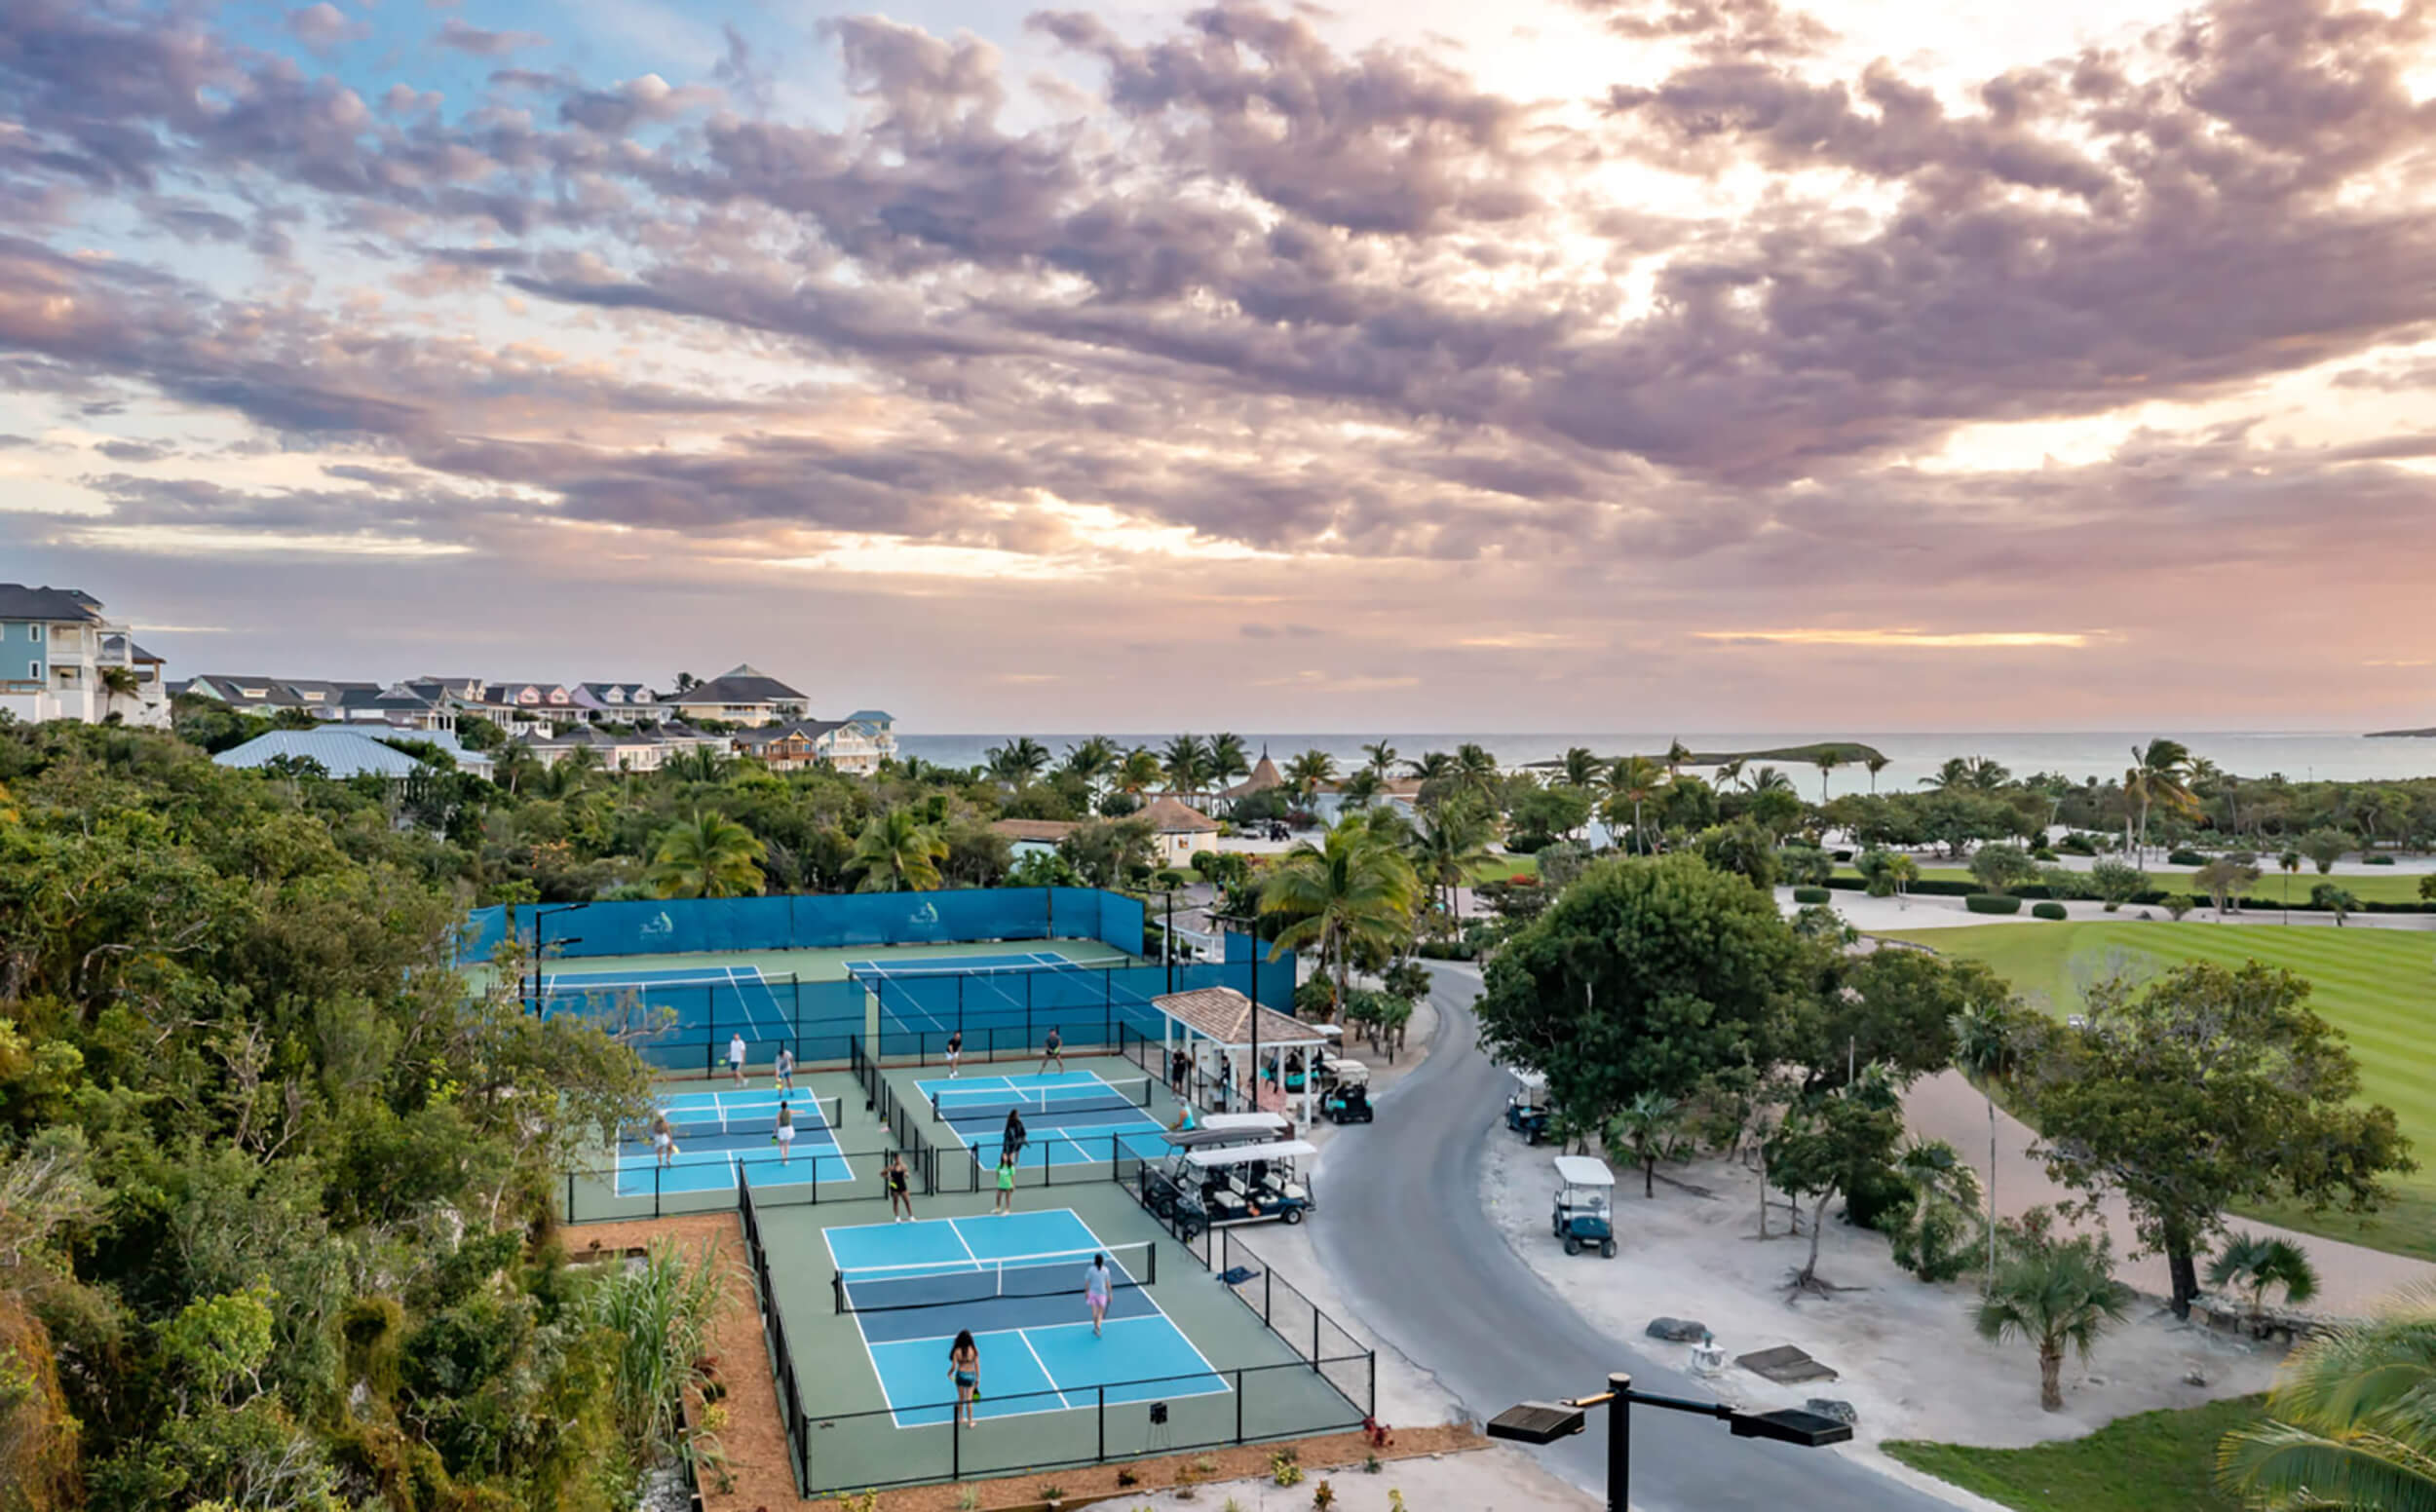 Pickle ball and tennis courts at The Abaco Club